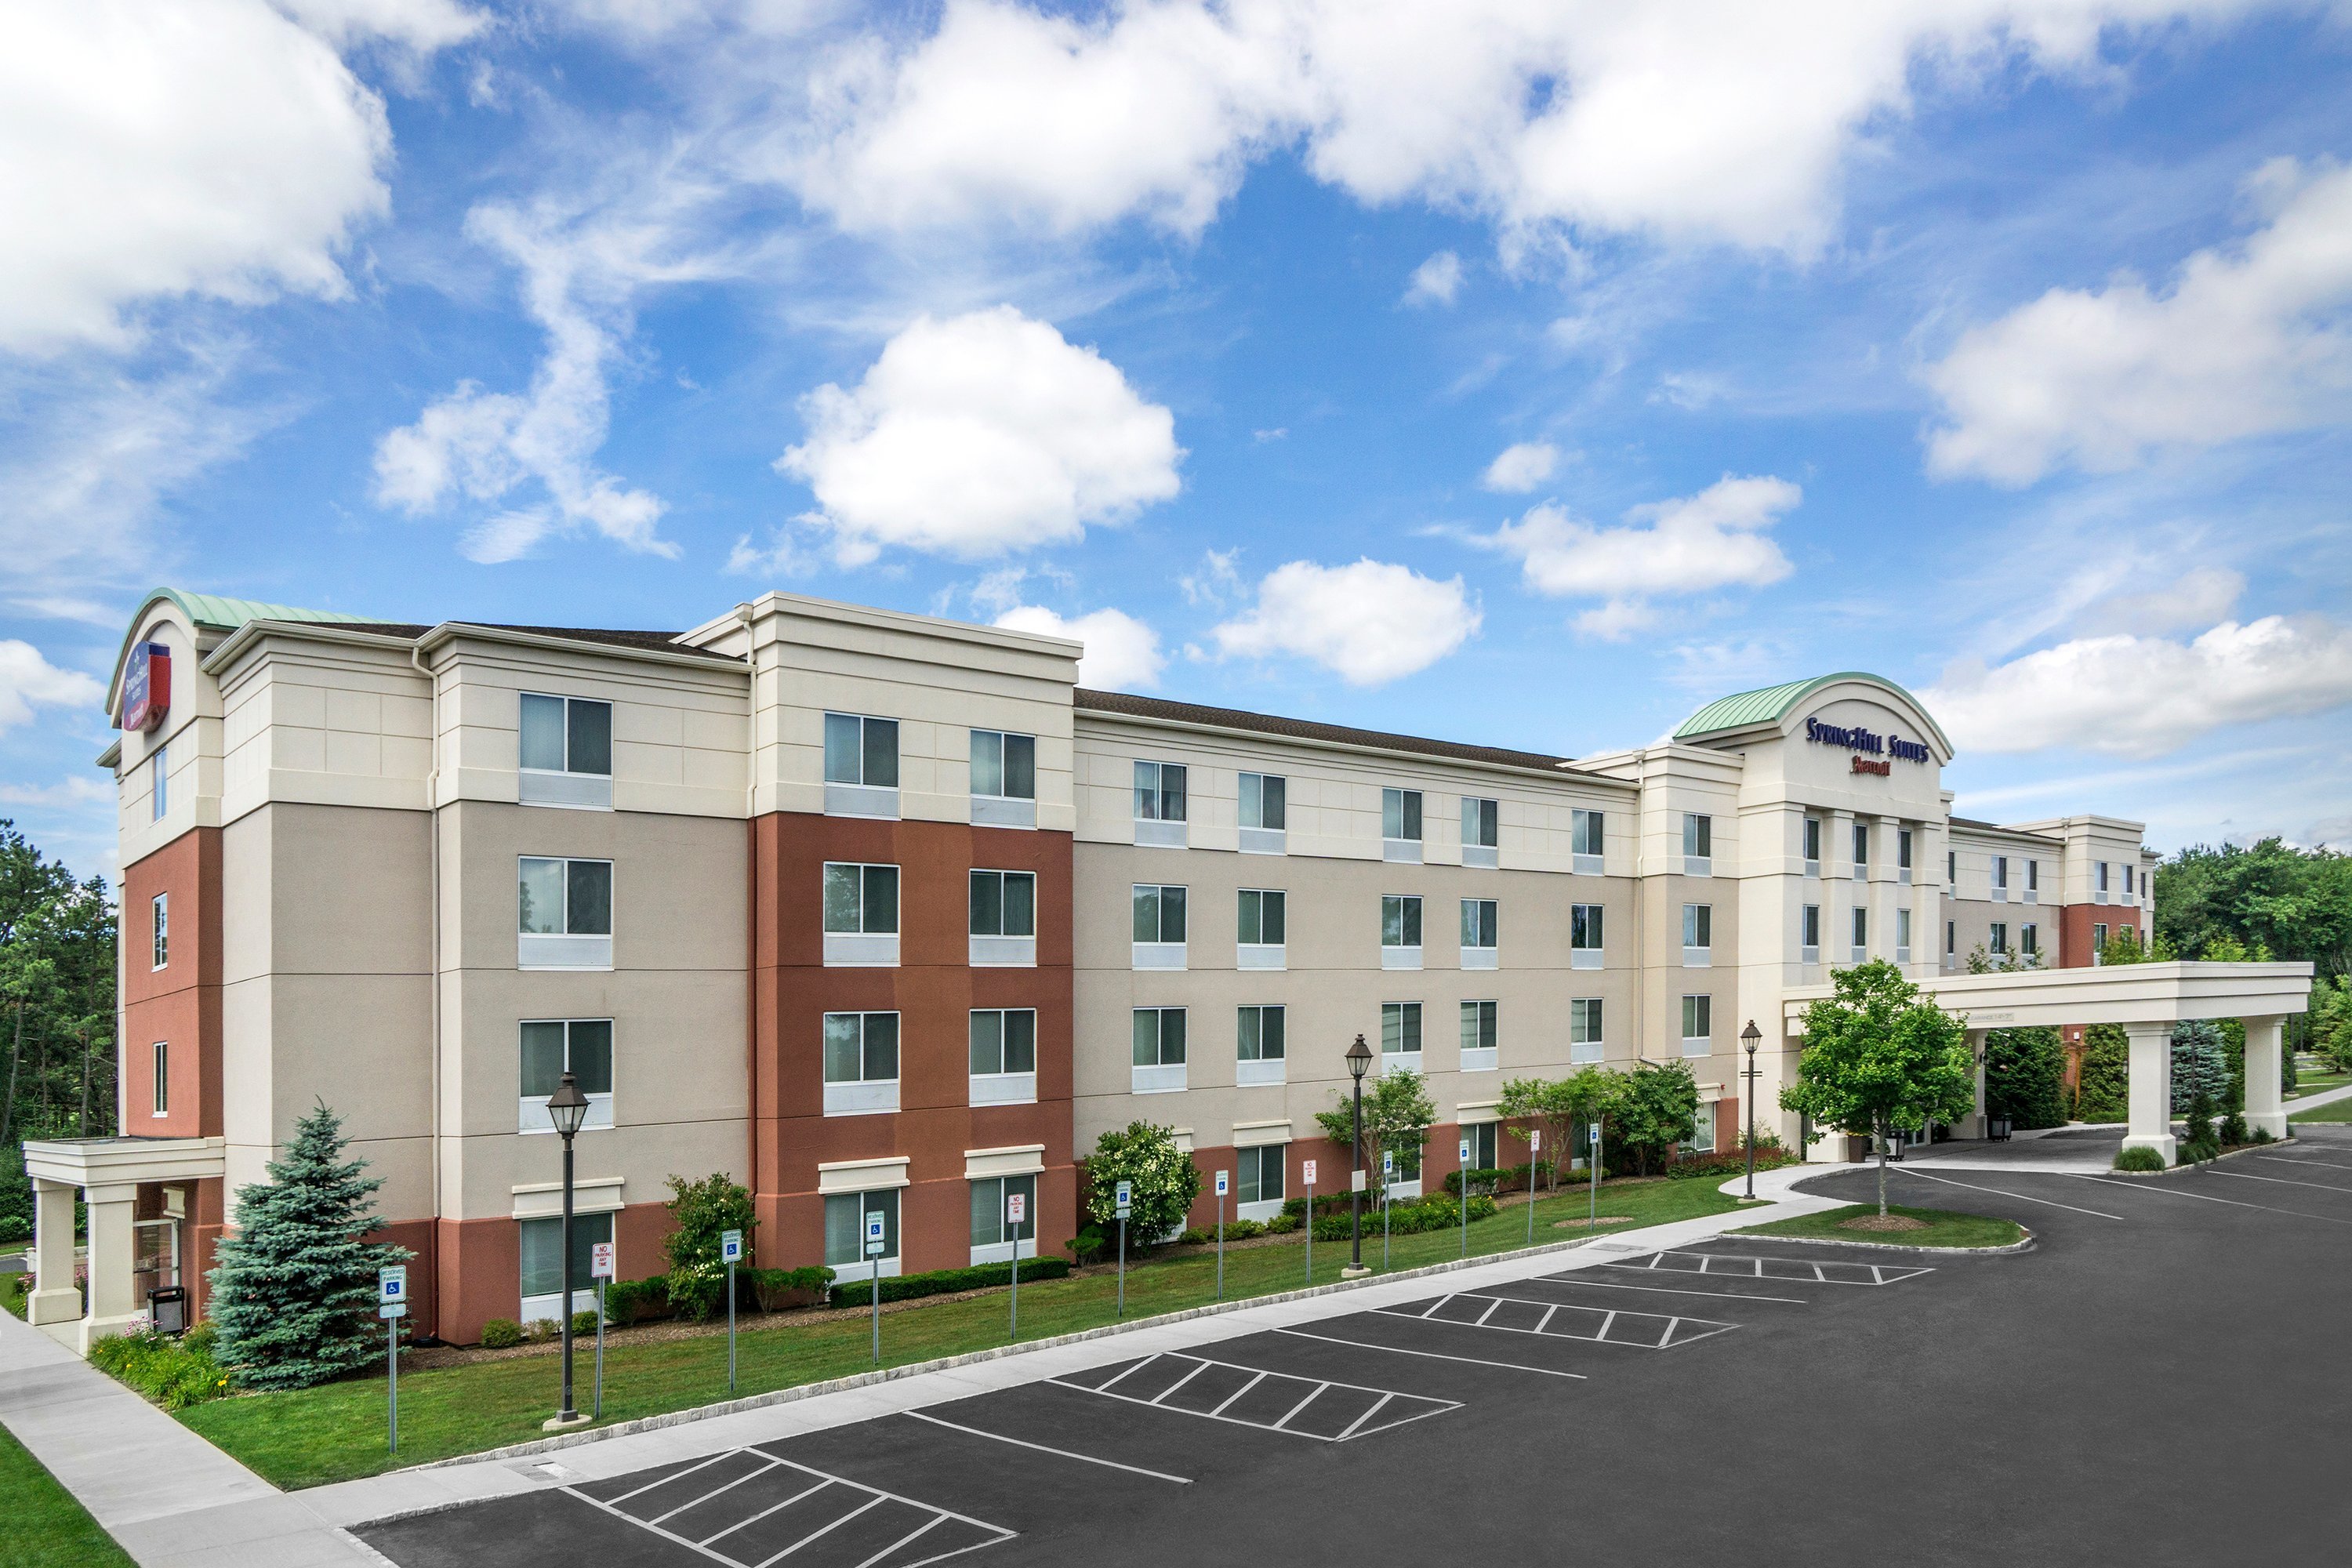 Photo of SpringHill Suites by Marriott Long Island Brookhaven, Bellport, NY